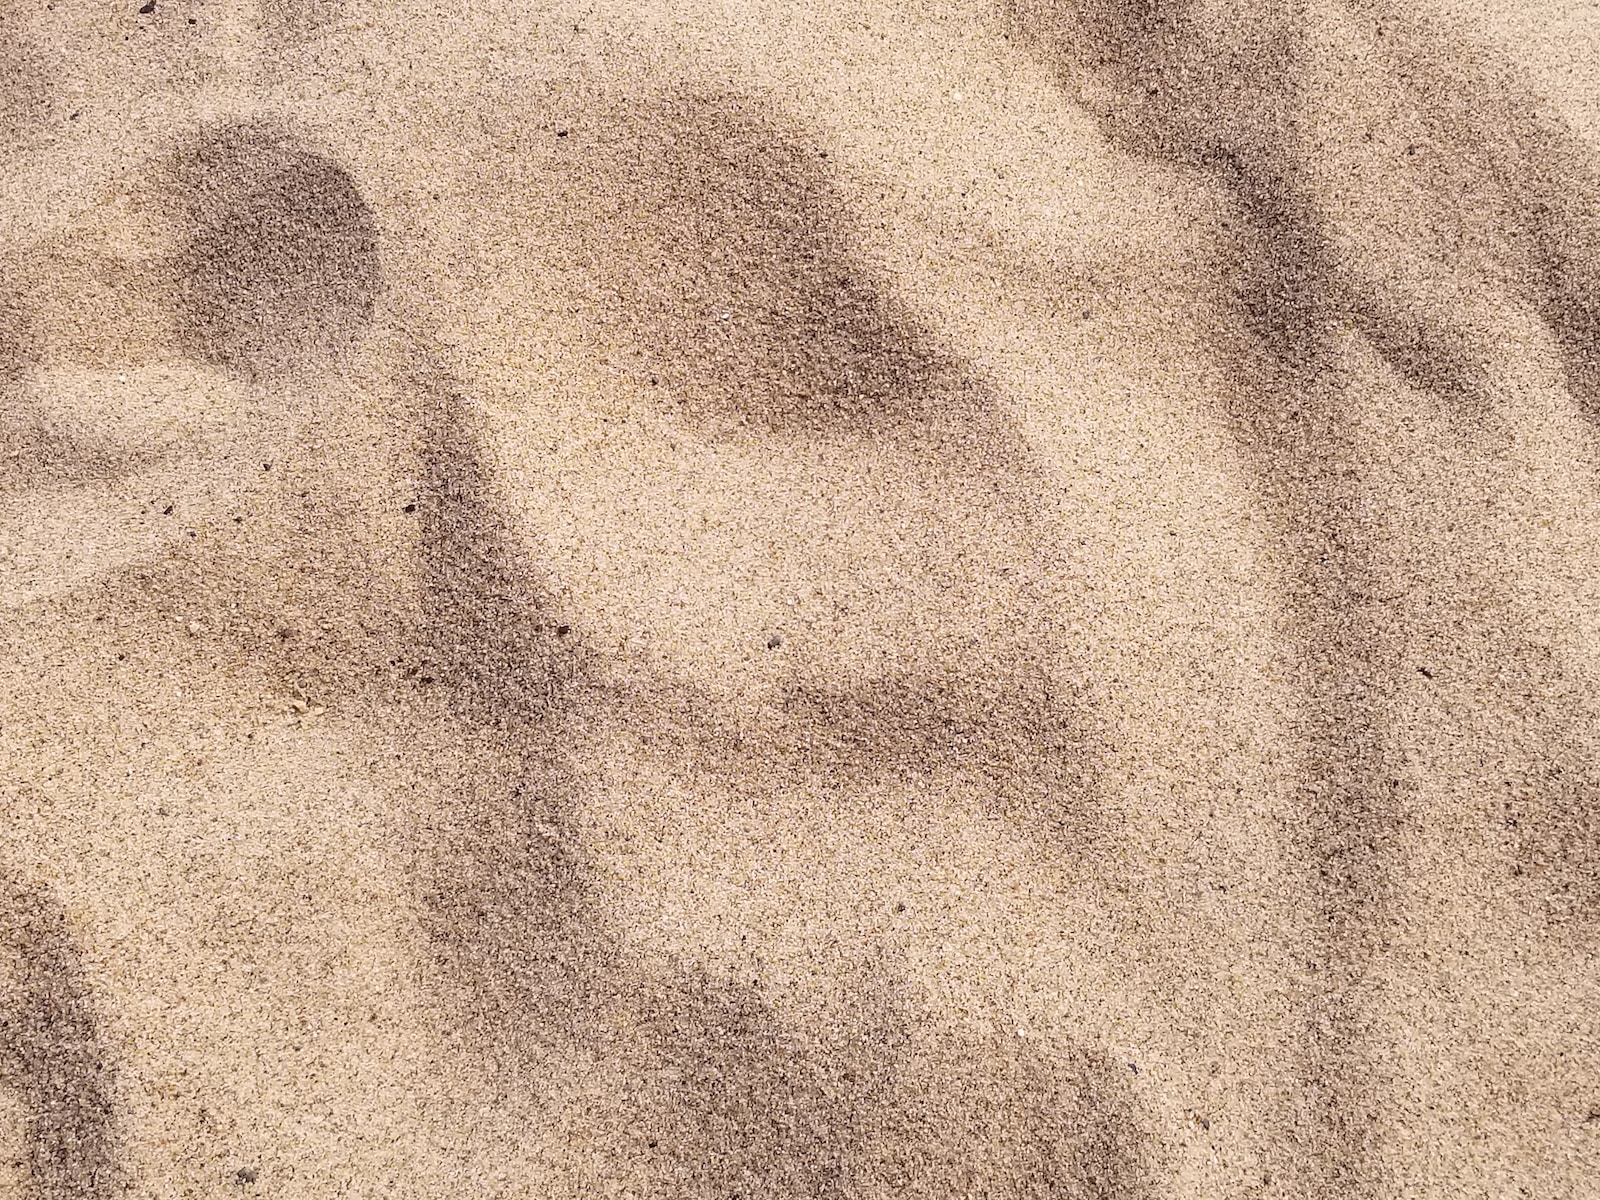 focus photo of brown sand